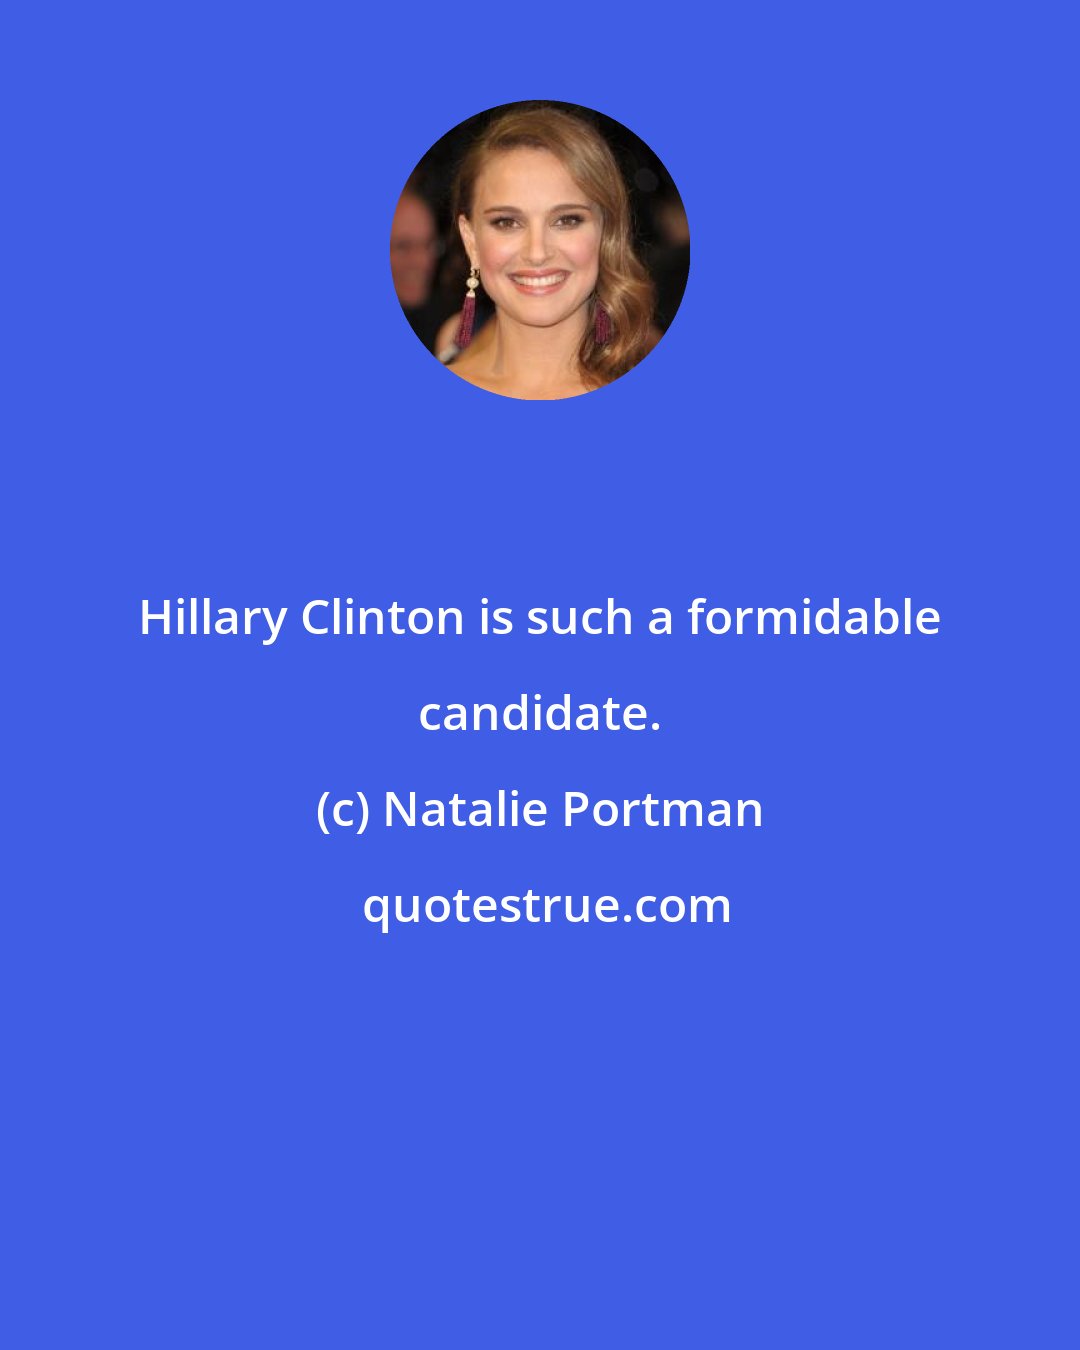 Natalie Portman: Hillary Clinton is such a formidable candidate.